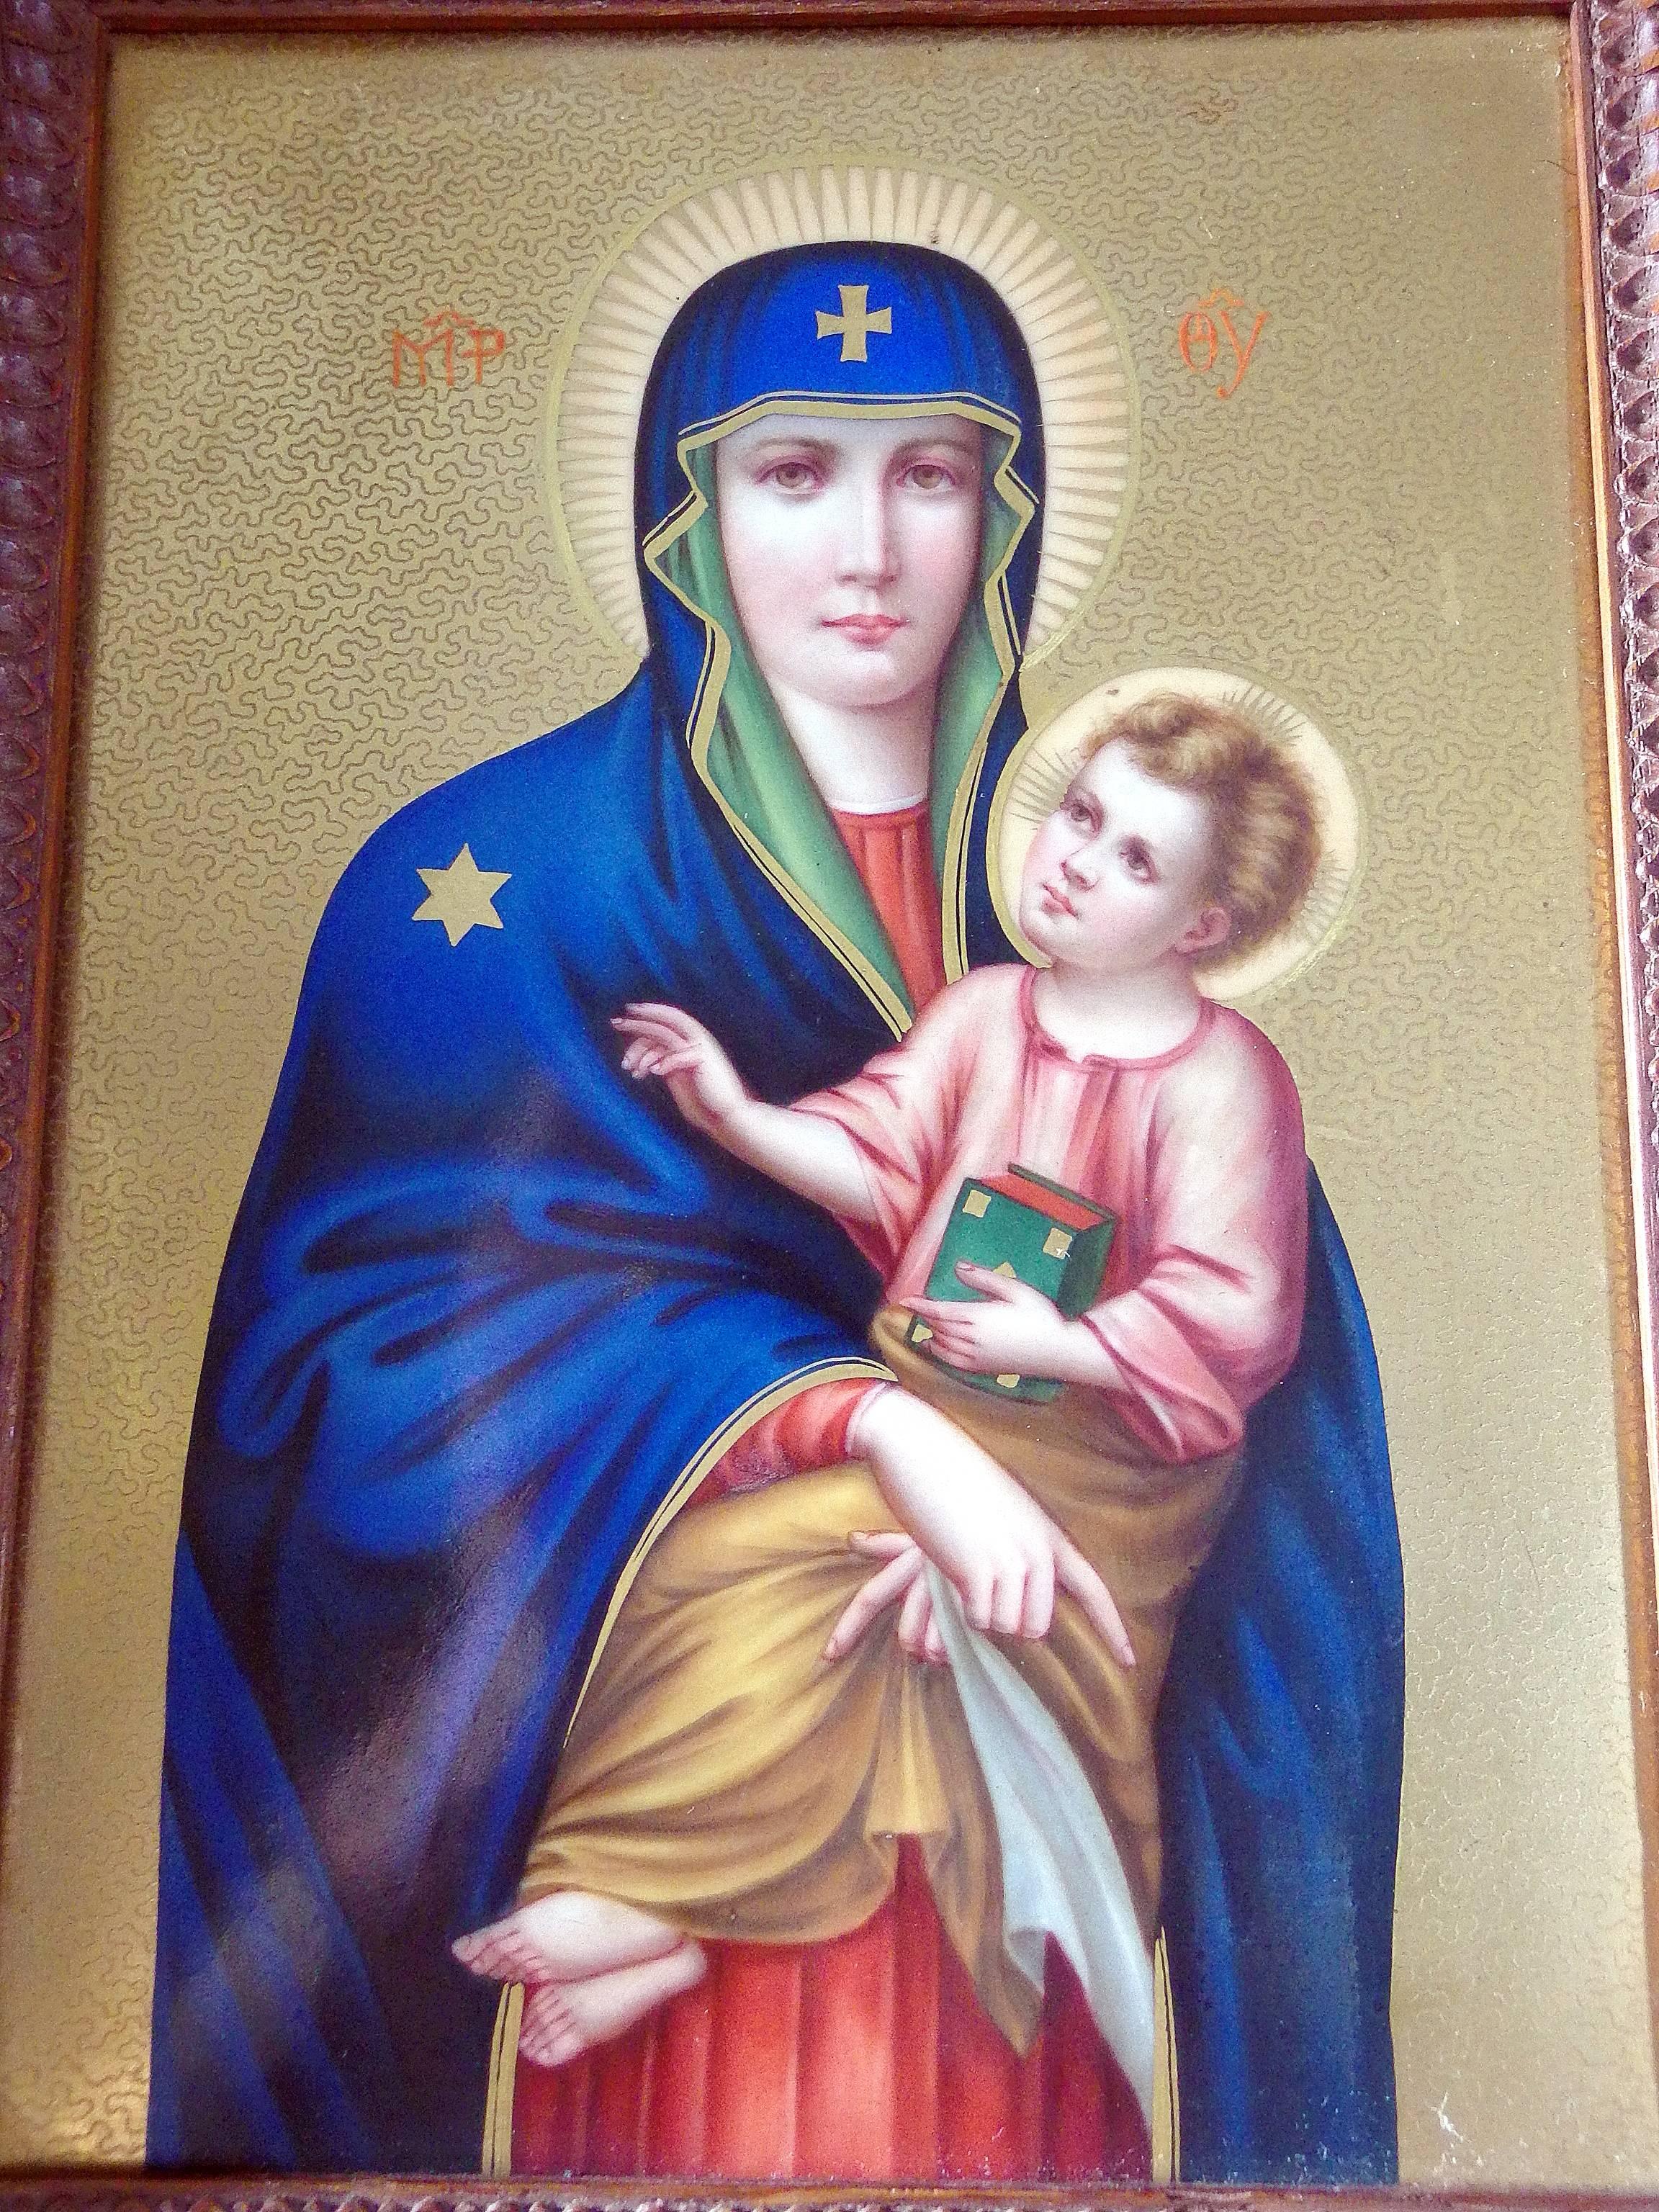 KPM Porcelain Plaque, Mary and Child as an Orthodox Icon, Berlin, circa 1880 For Sale 2